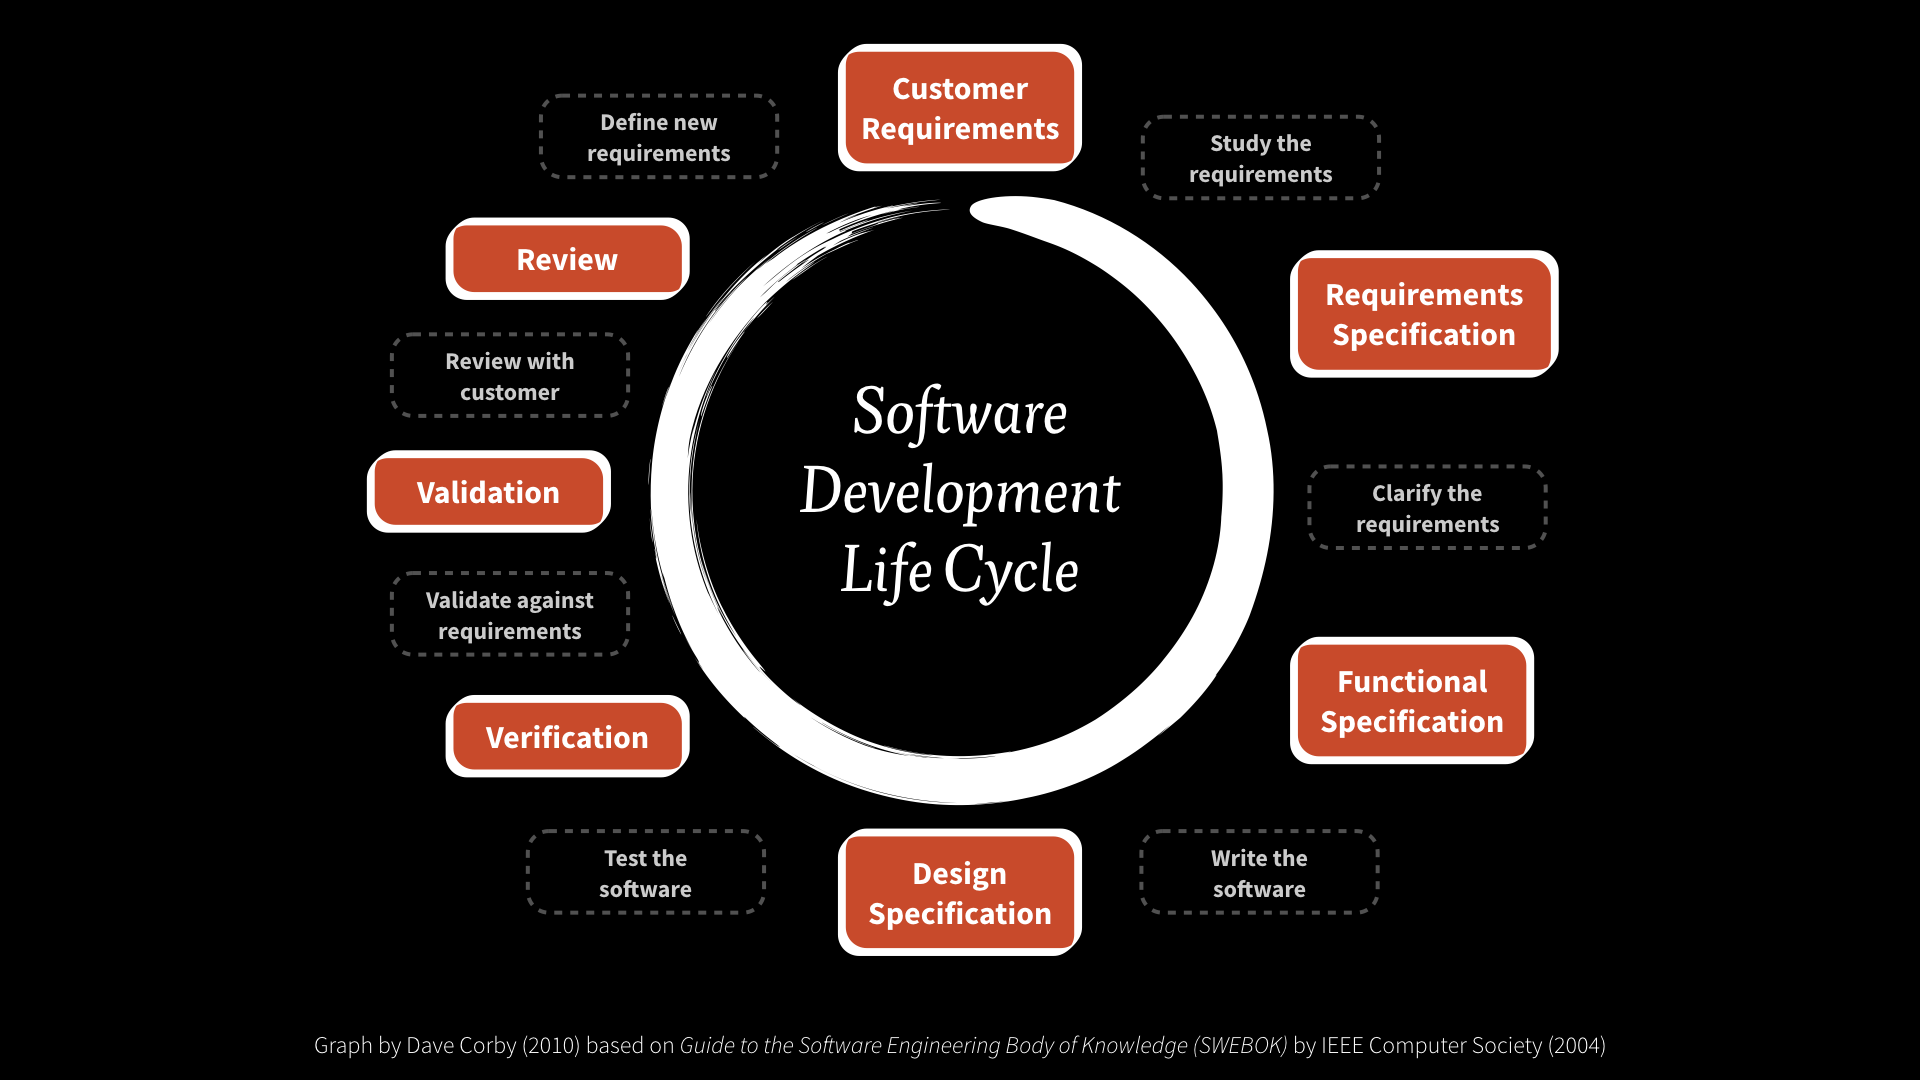 The software development life cycle by Dave Corby (2010) based on Guide to the Software Engineering Body of Knowledge (SWEBOK) by IEEE Computer Society (2004)